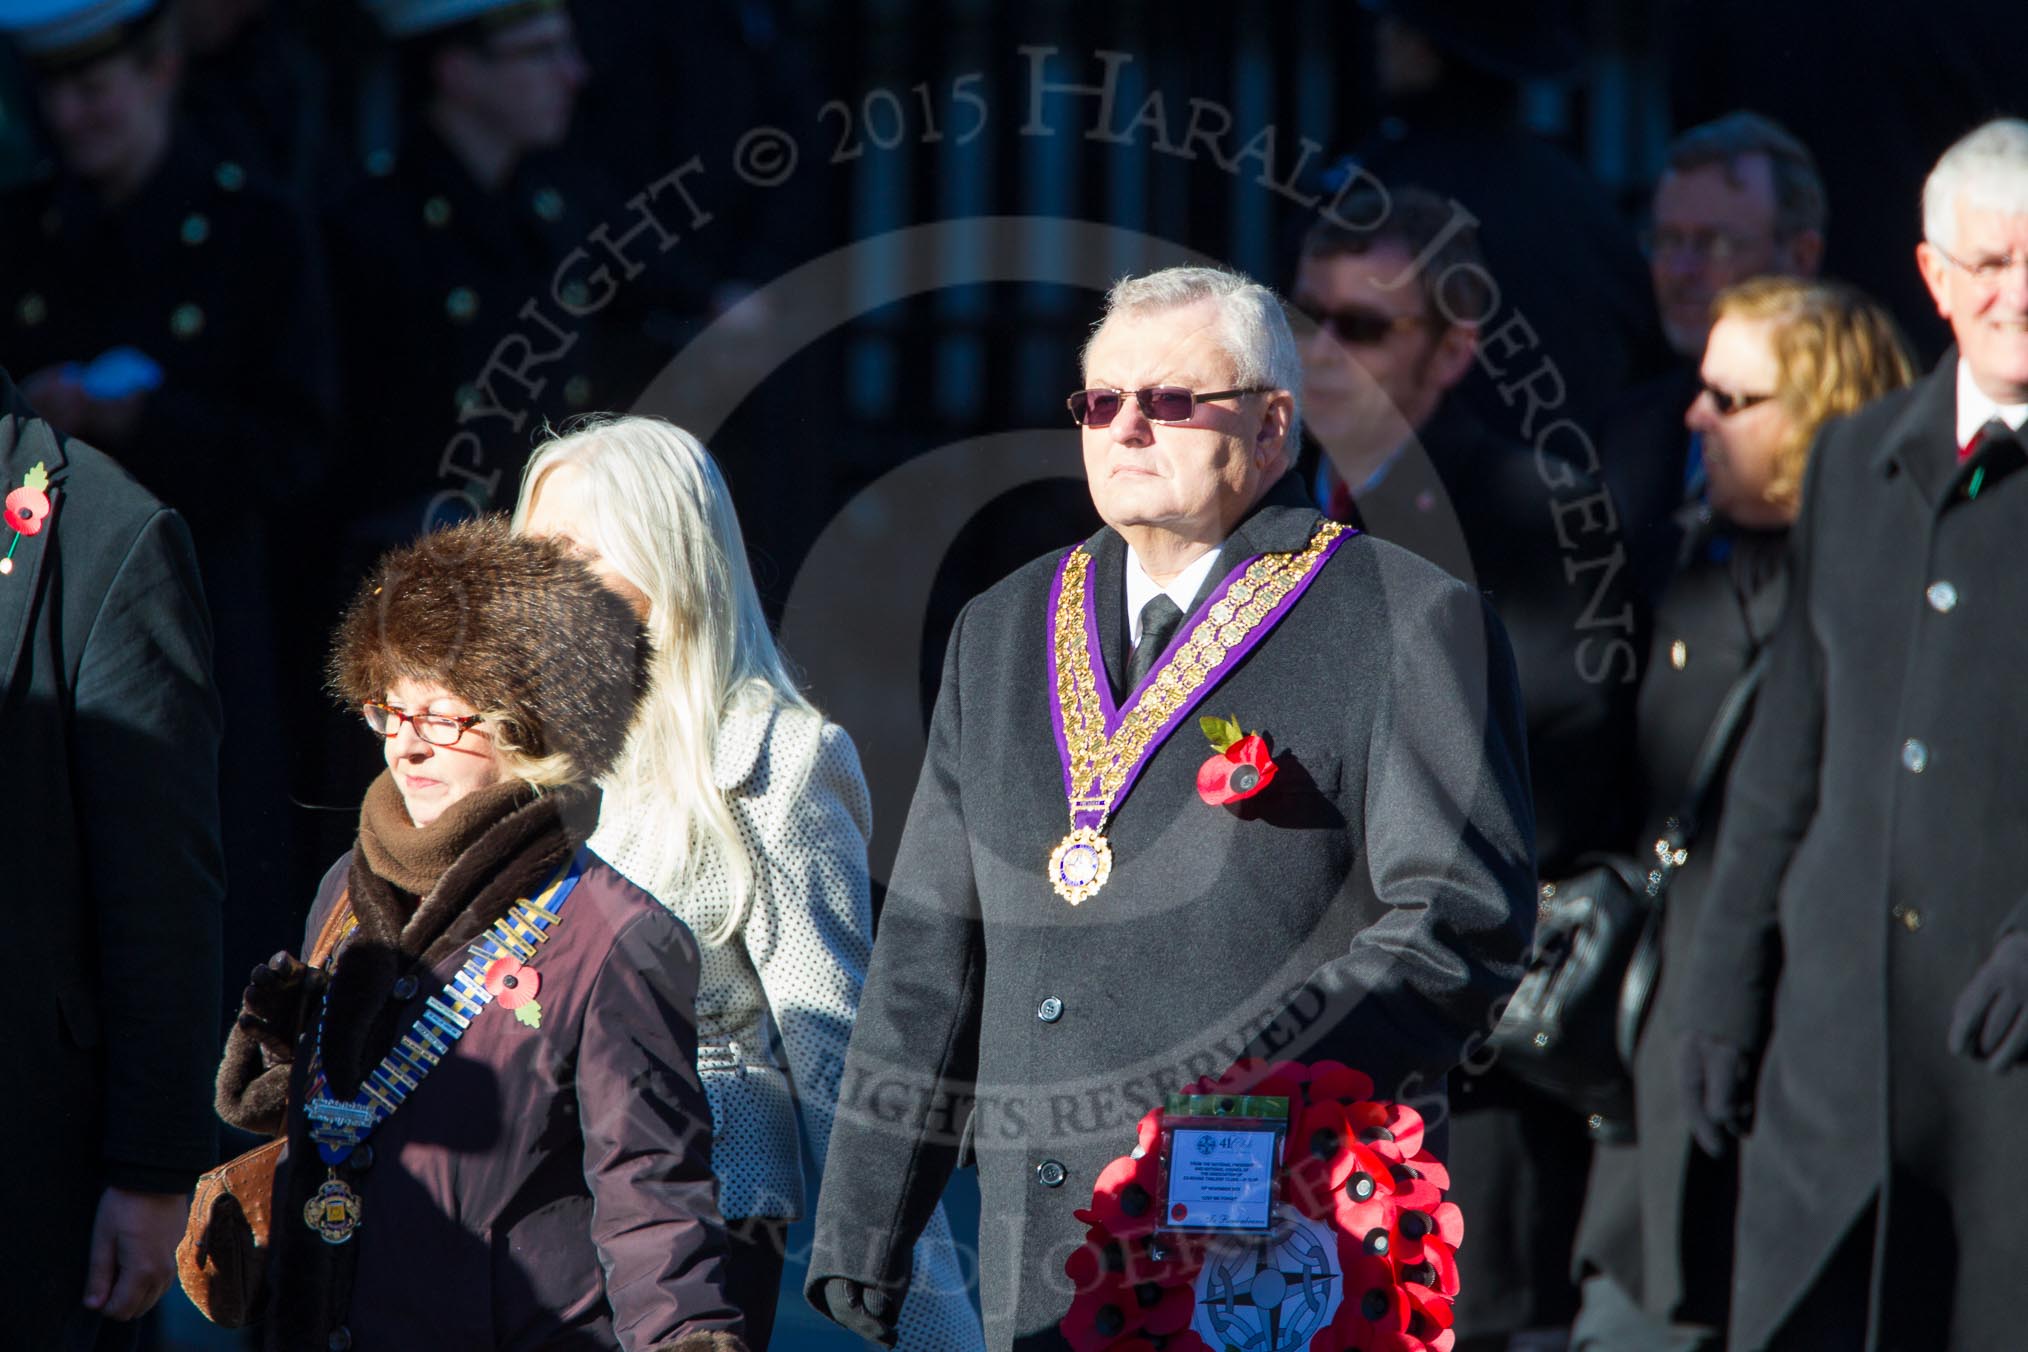 Remembrance Sunday Cenotaph March Past 2013: M39 - National Association of Round Tables..
Press stand opposite the Foreign Office building, Whitehall, London SW1,
London,
Greater London,
United Kingdom,
on 10 November 2013 at 12:14, image #2178